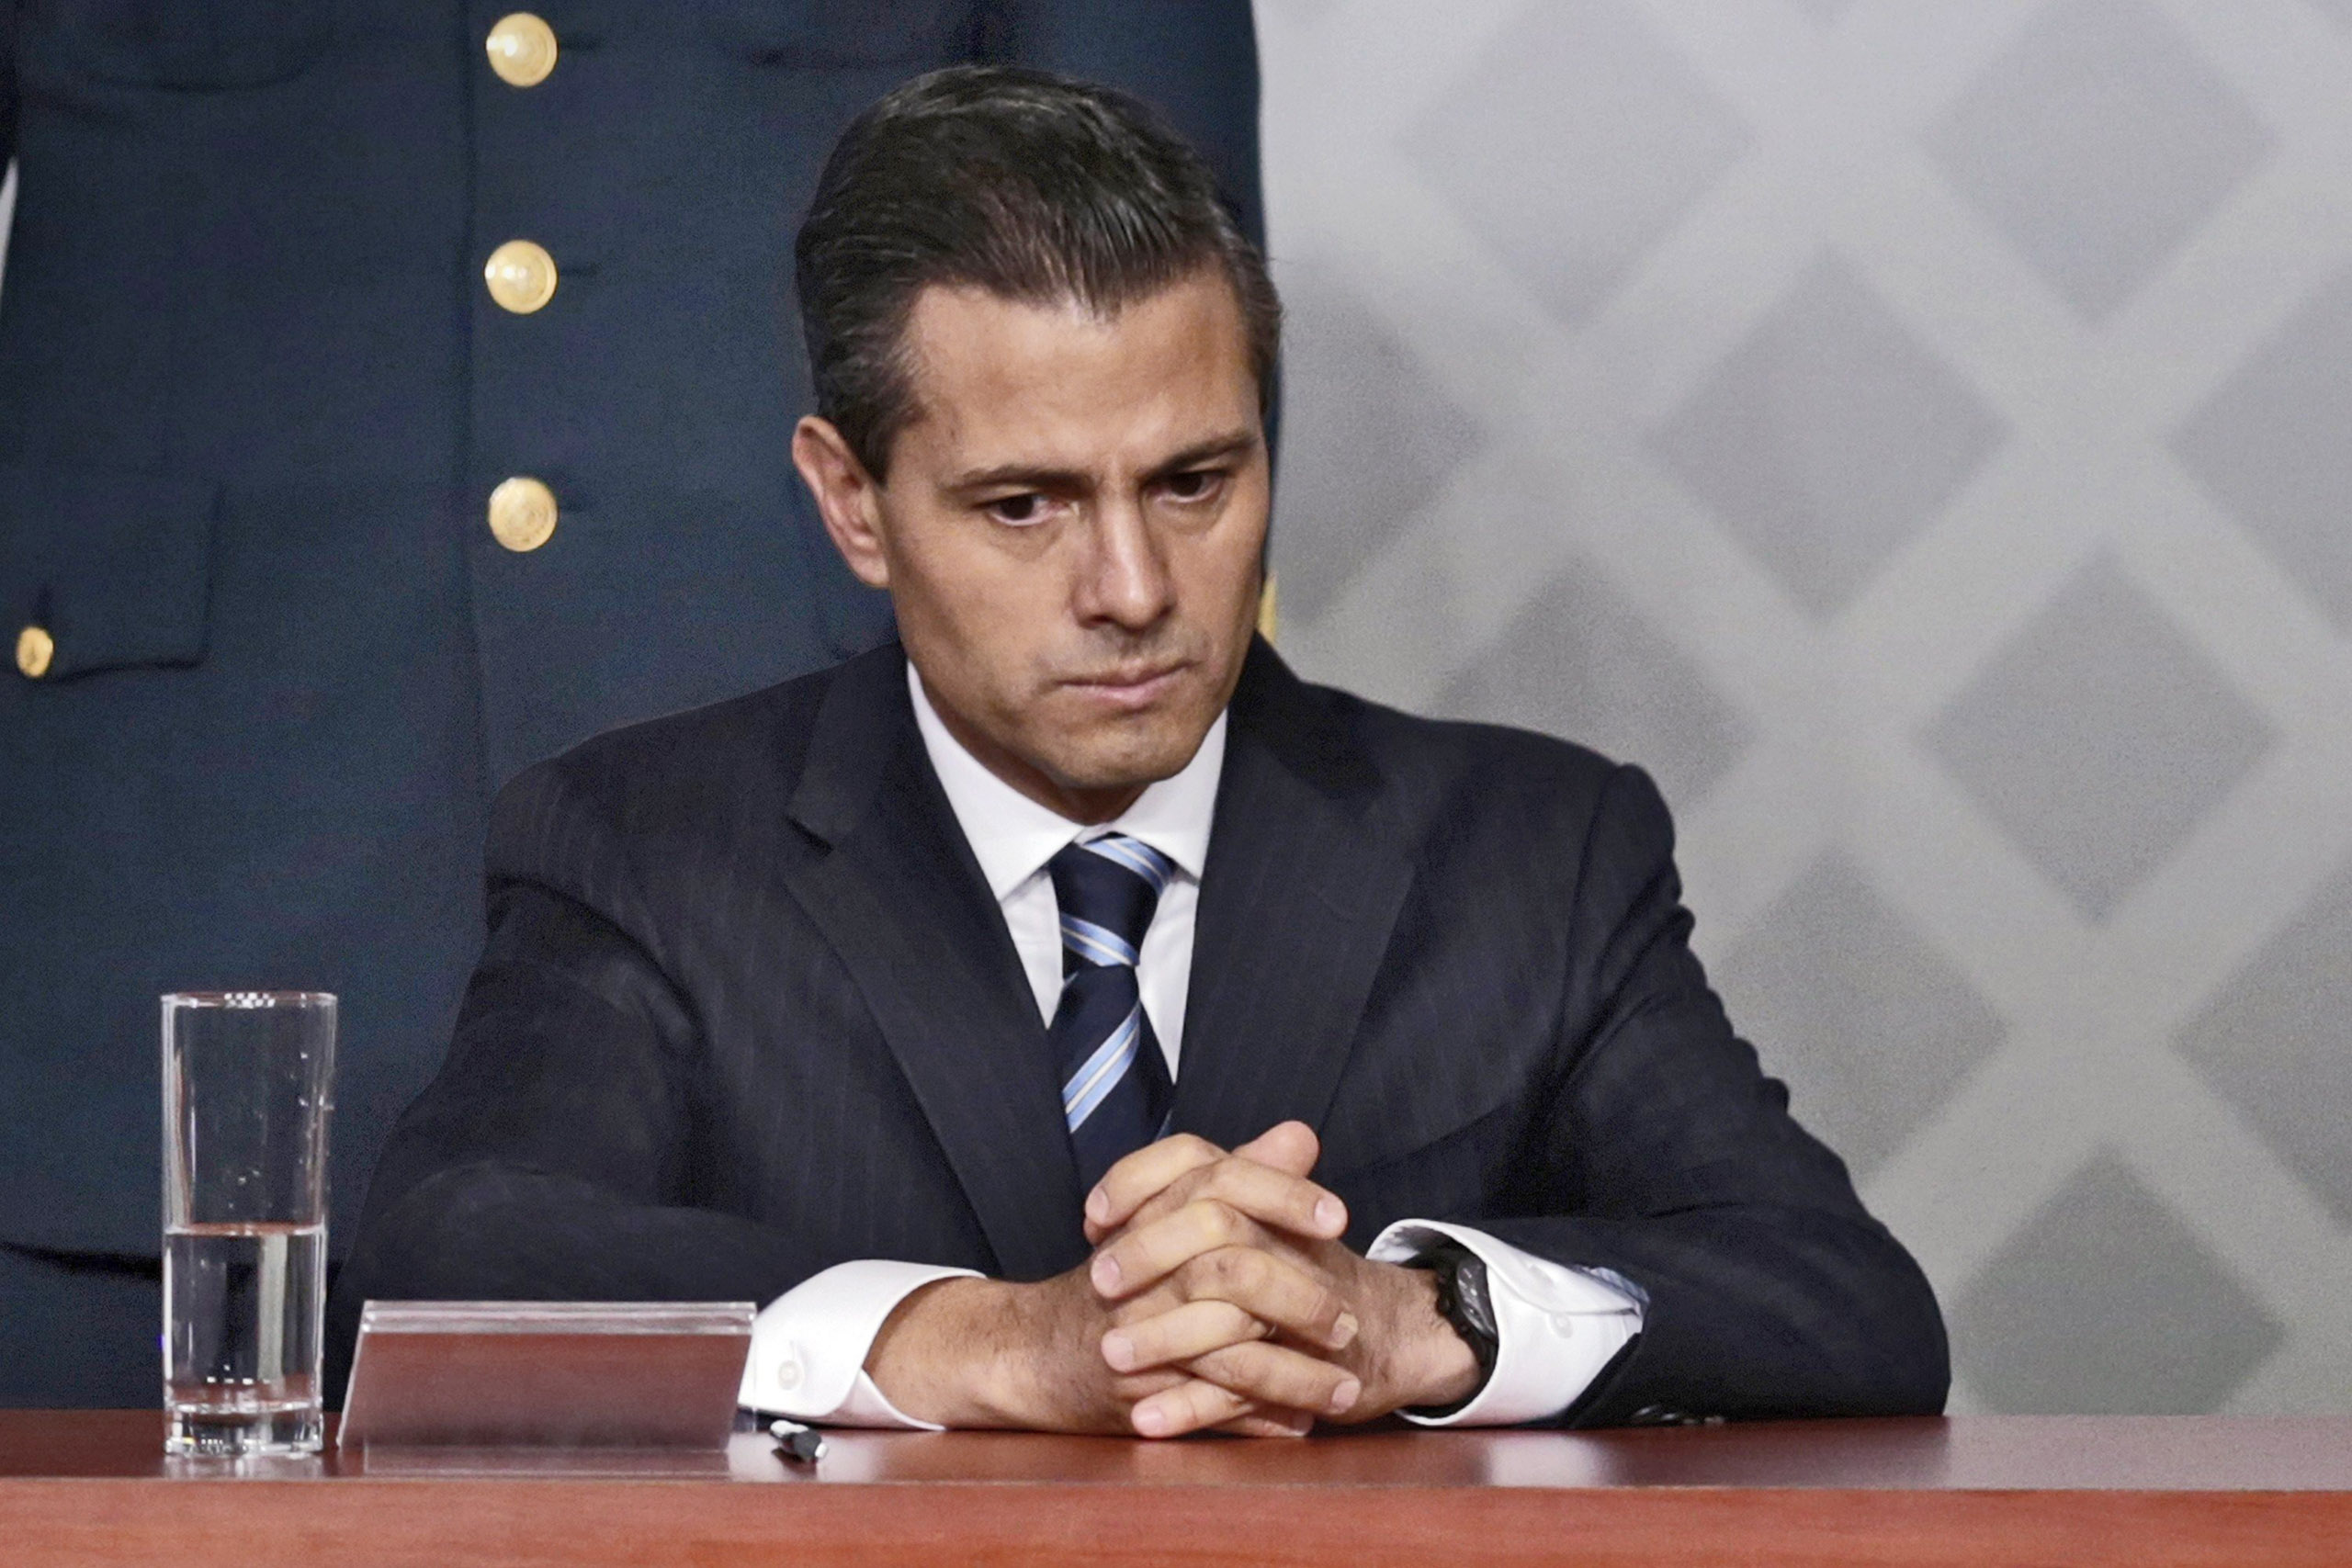 Mexico's President Enrique Pena Nieto sits during a meeting with lawyers in Mexico City